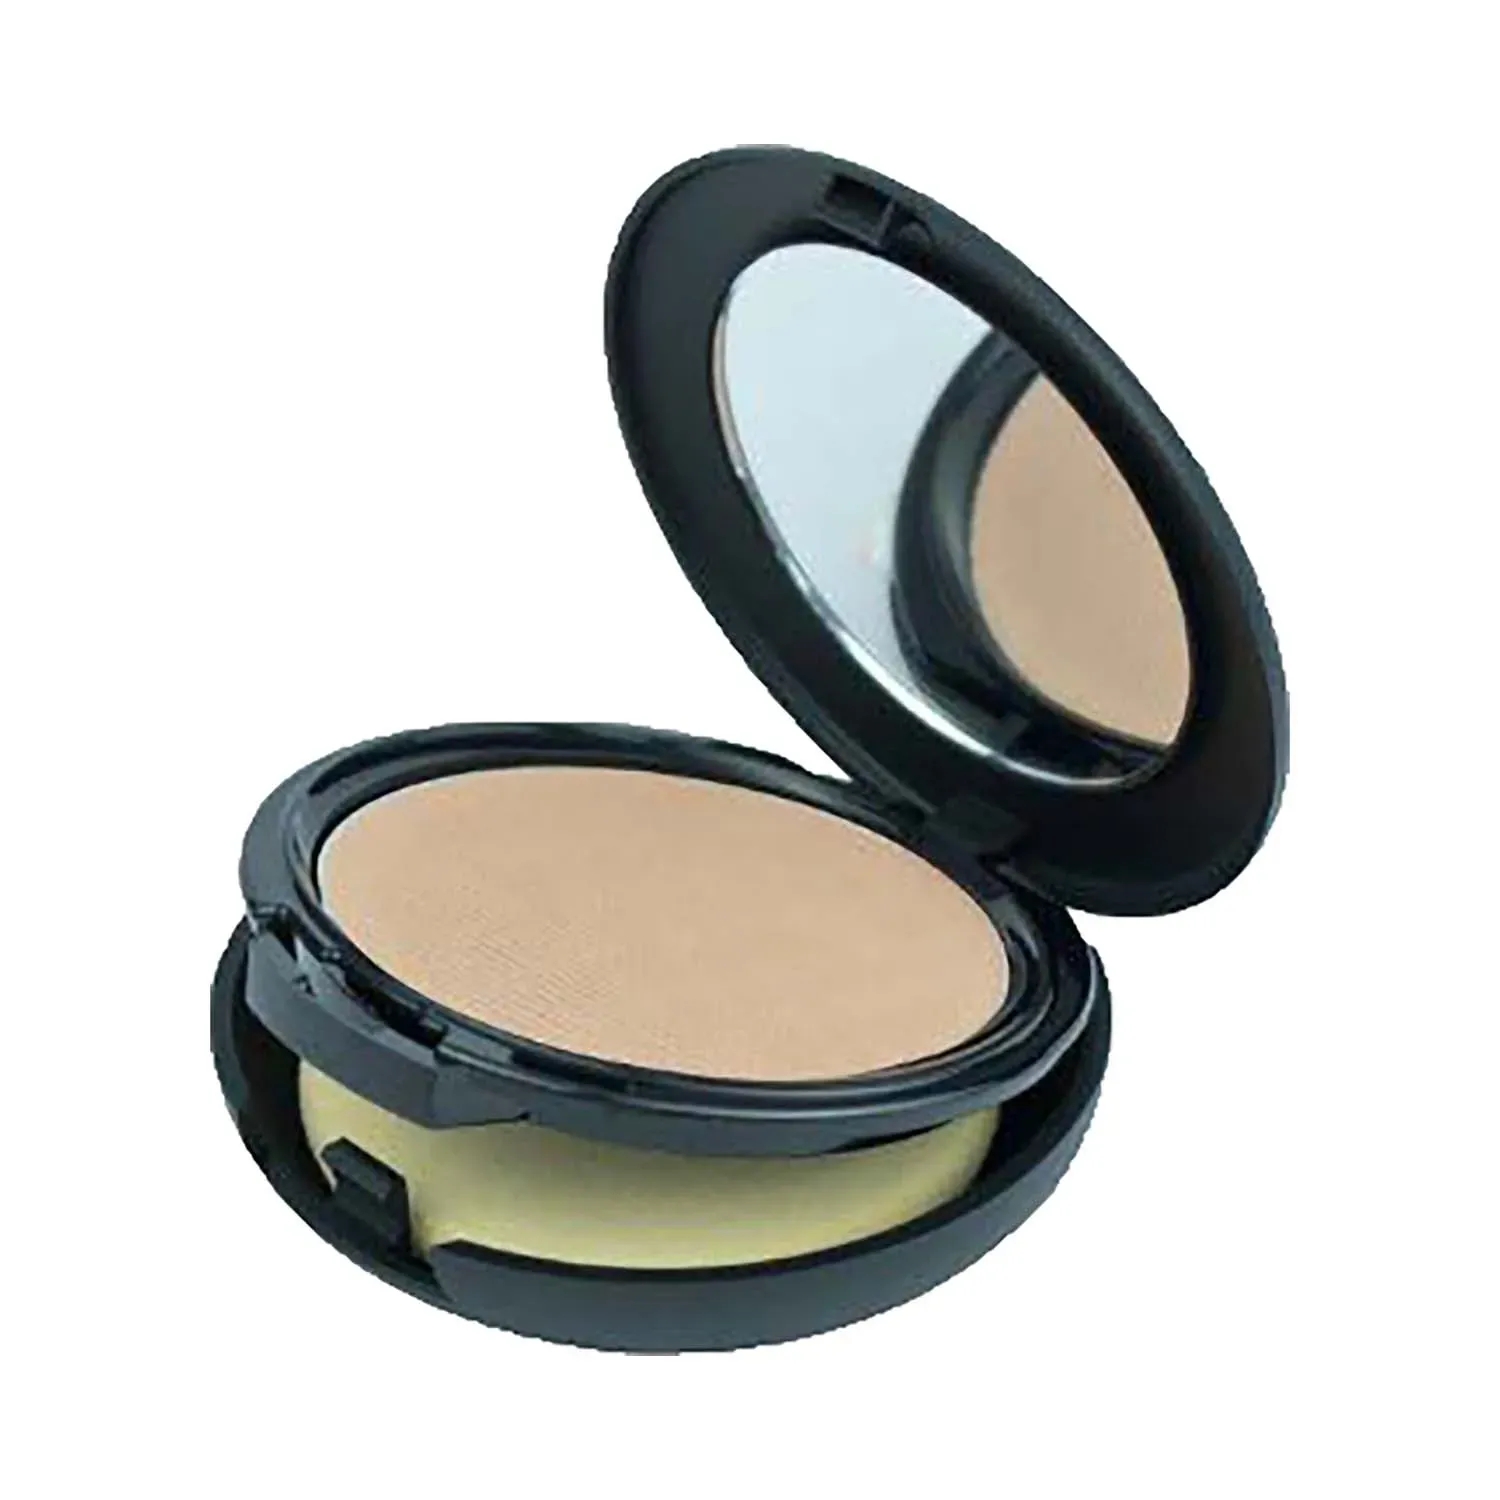 Faces Canada | Faces Canada Ultime Pro Expert Cover Compact - 03 Beige (9g)